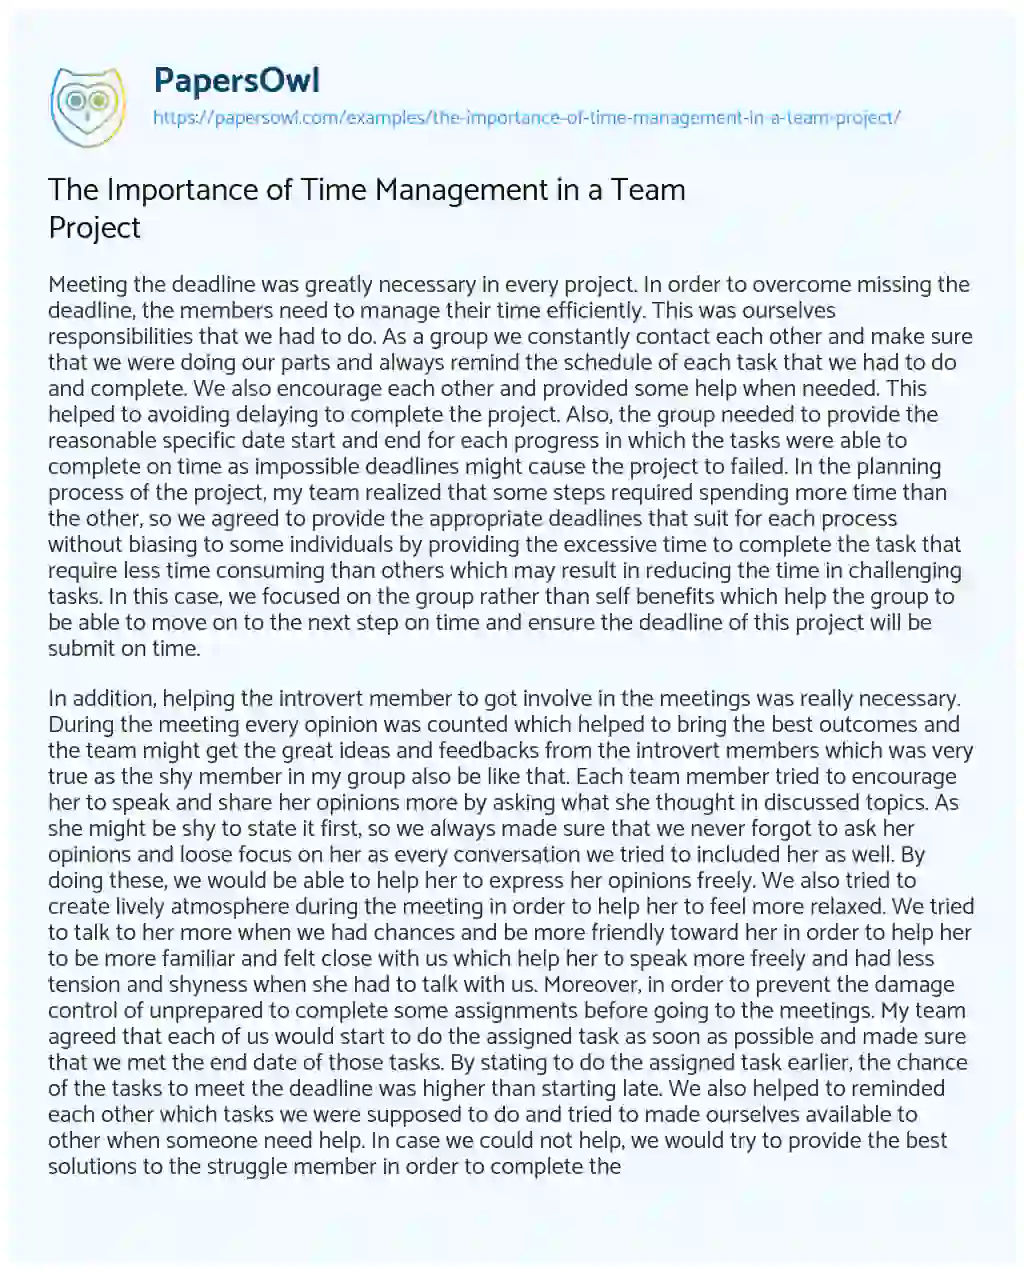 Essay on The Importance of Time Management in a Team Project